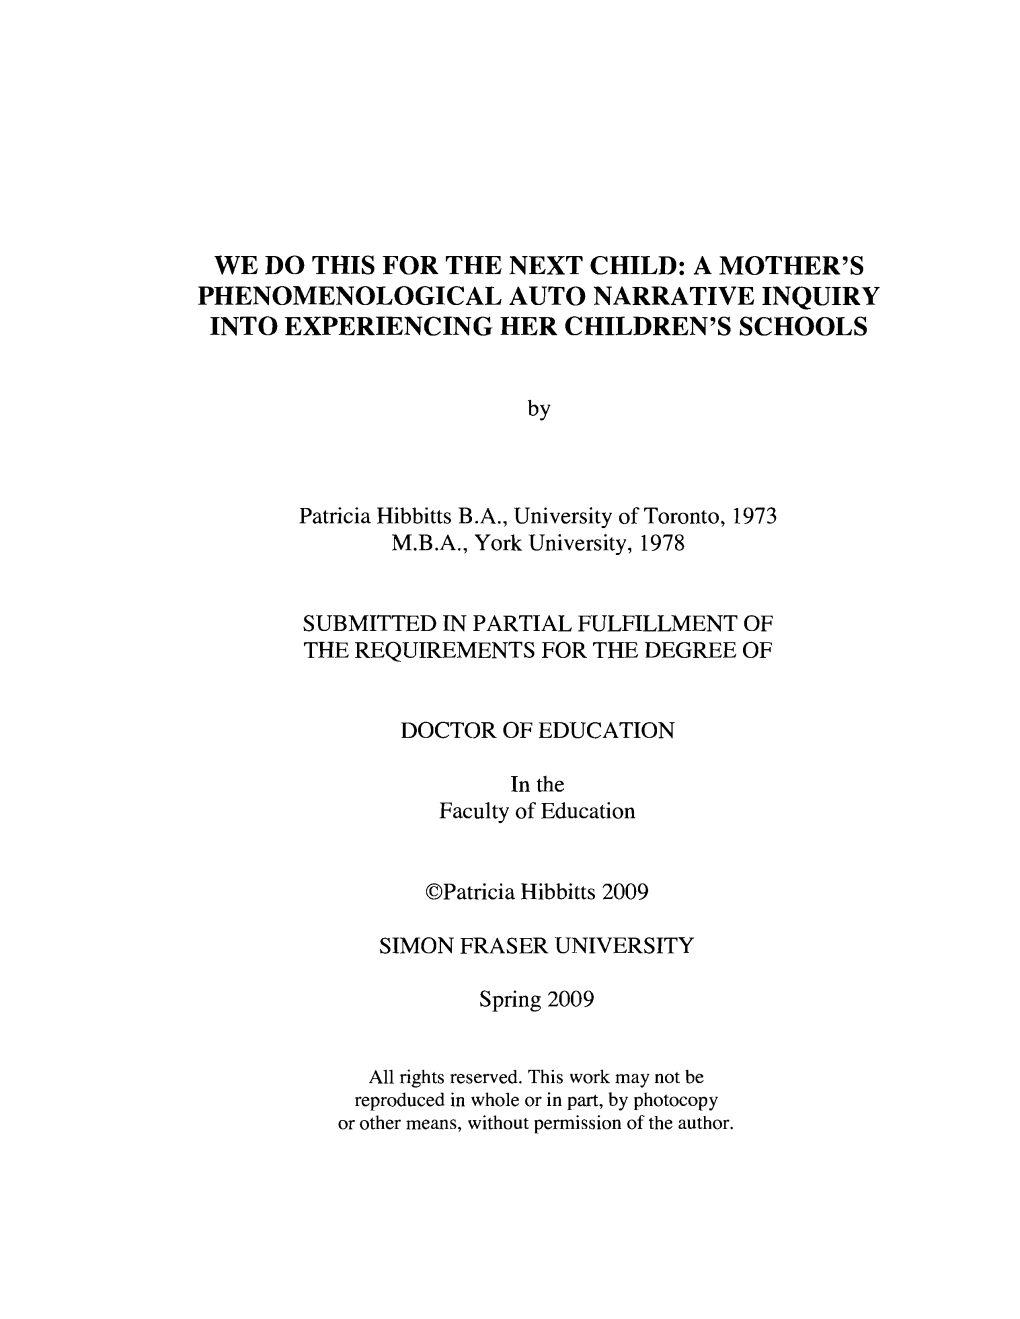 We Do This for the Next Child: a Mother's Phenomenological Auto Narrative Inquiry Into Experiencing Her Children's Schools